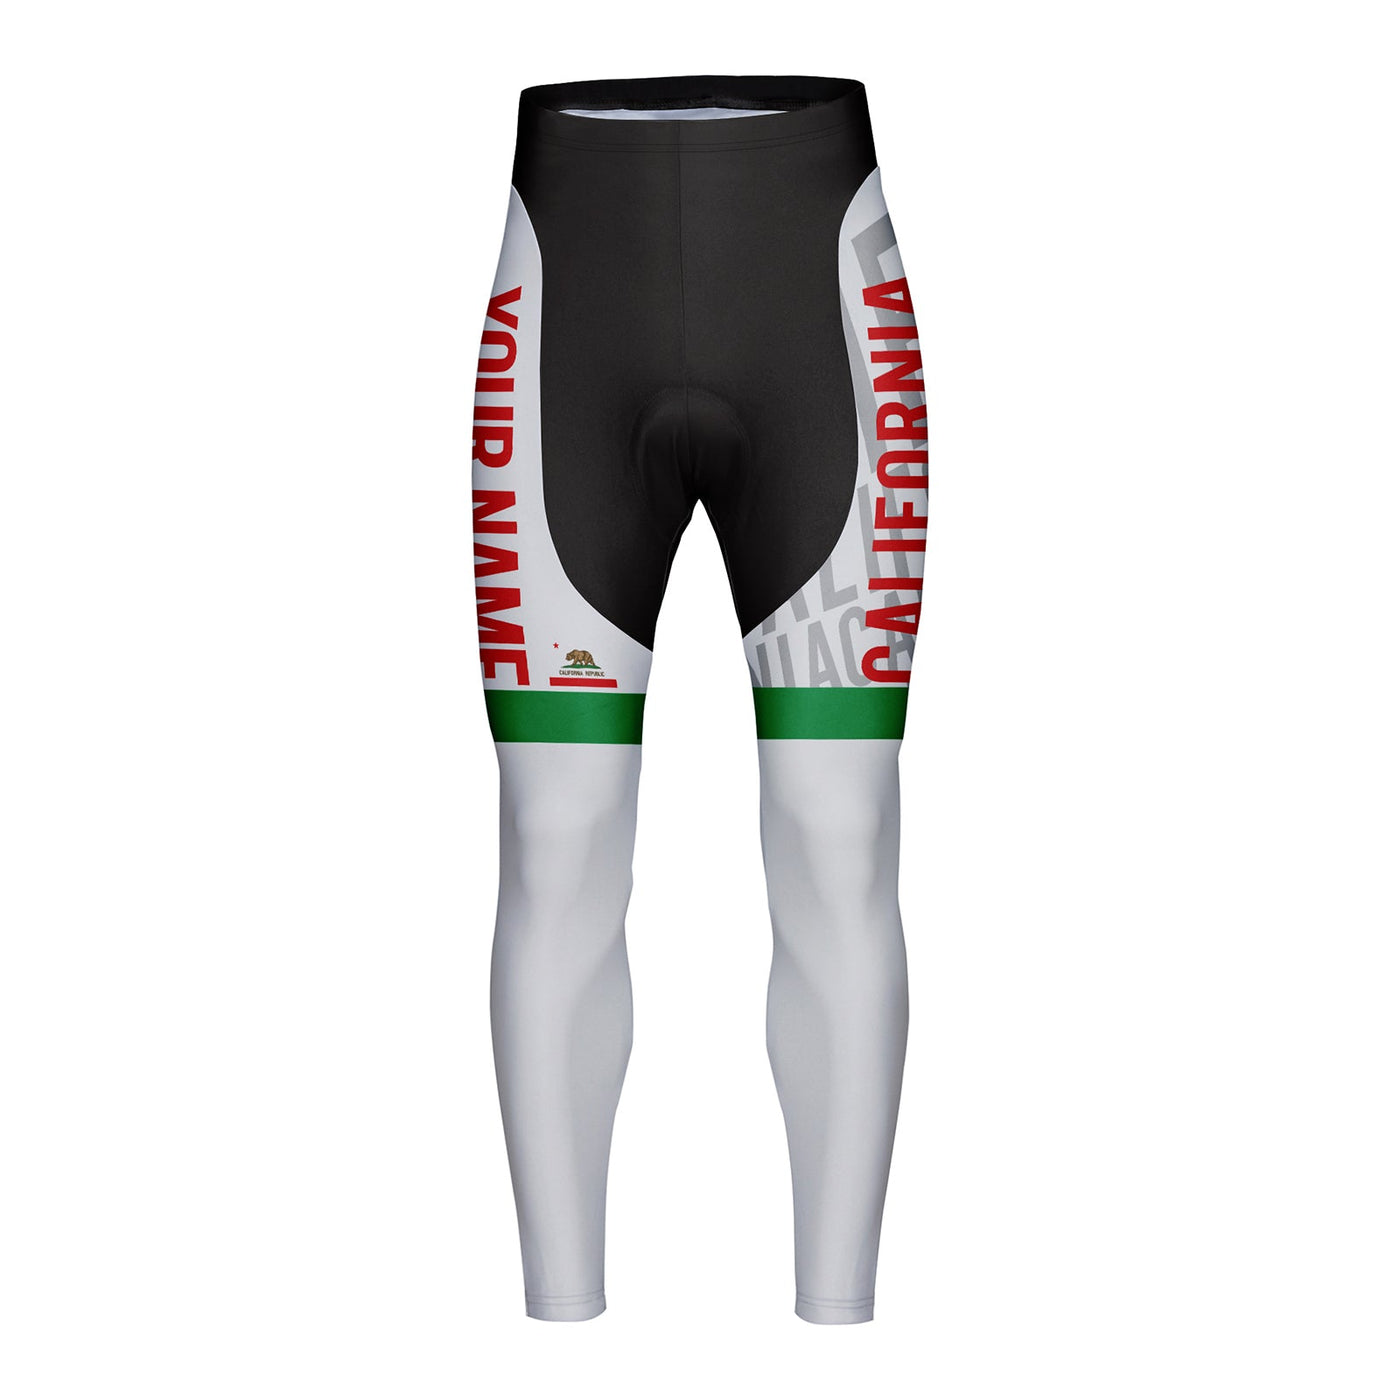 Customized California Unisex Thermal Fleece Cycling Tights Long Pants